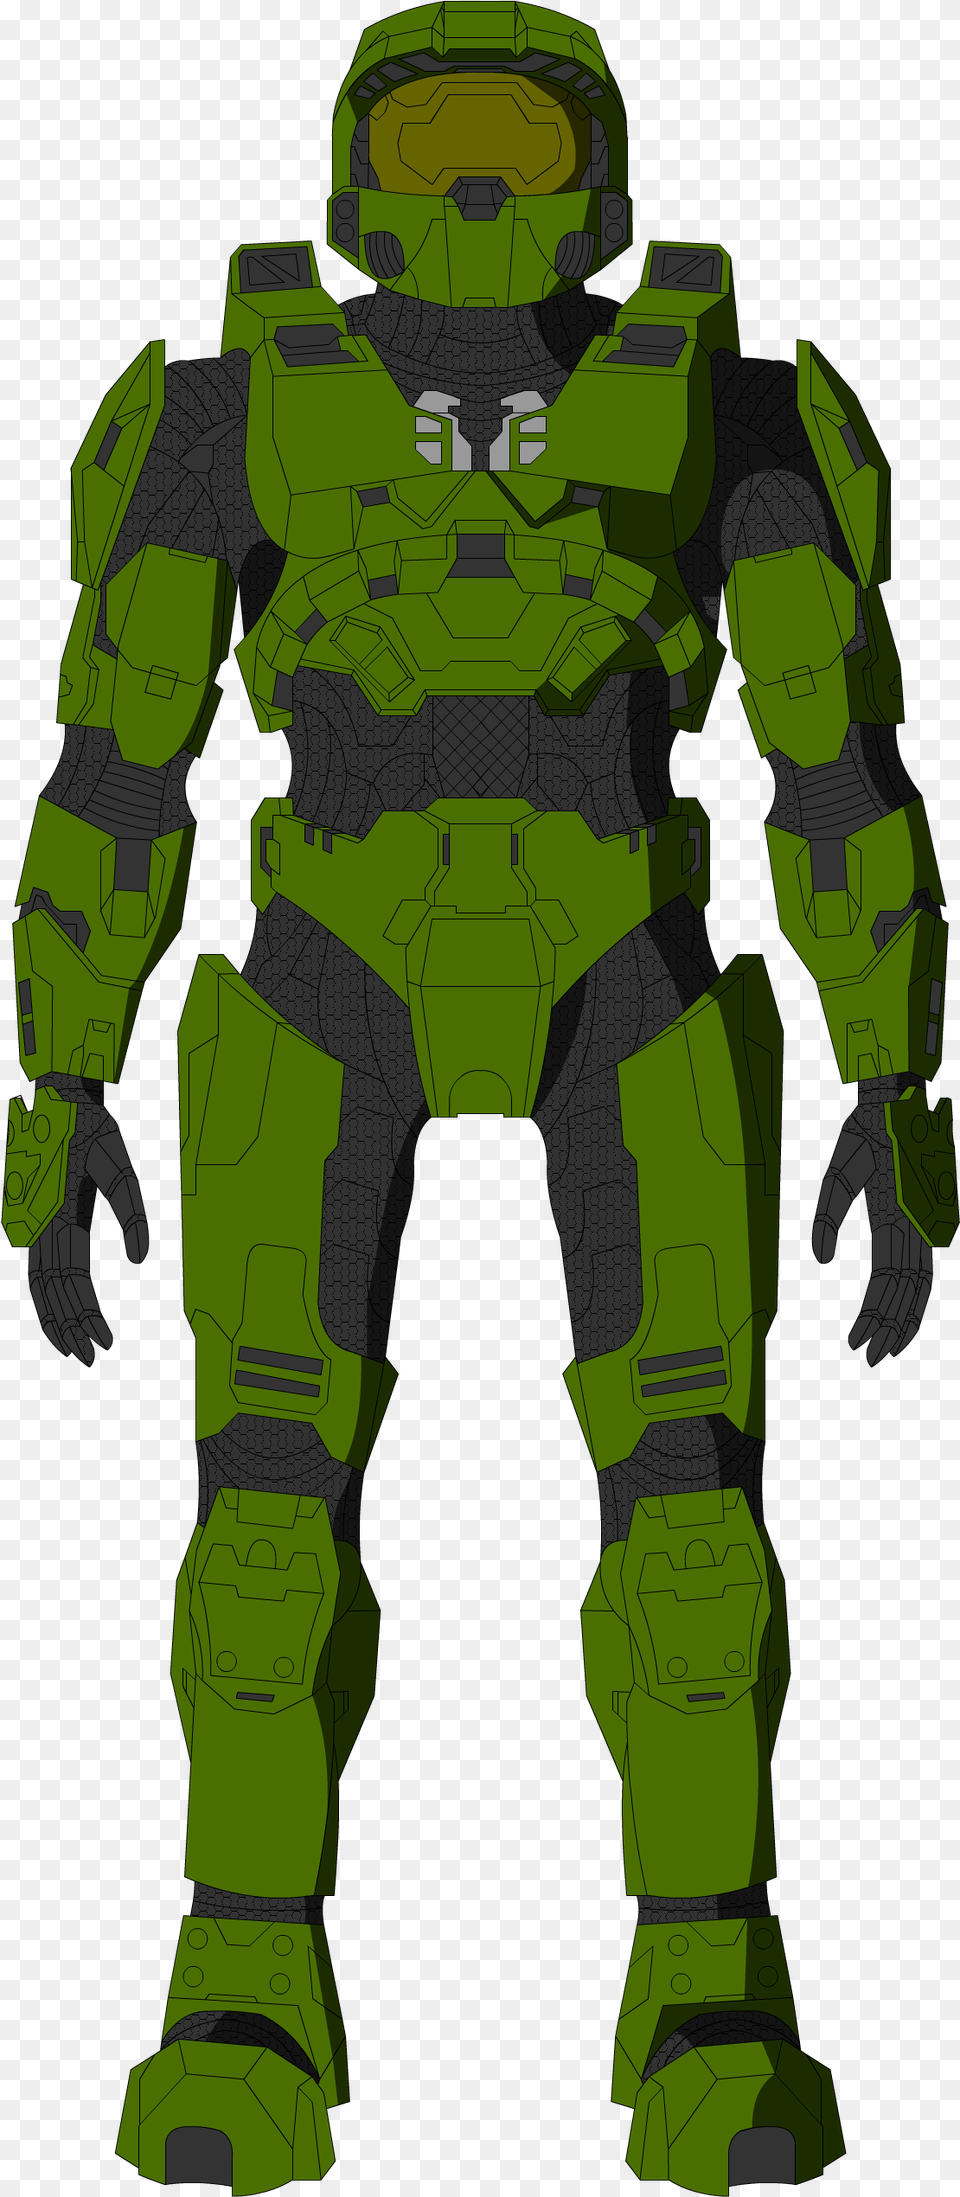 Mobile Joint Objective Light Nonstandard Individual Mjolnir Armor, Green Free Png